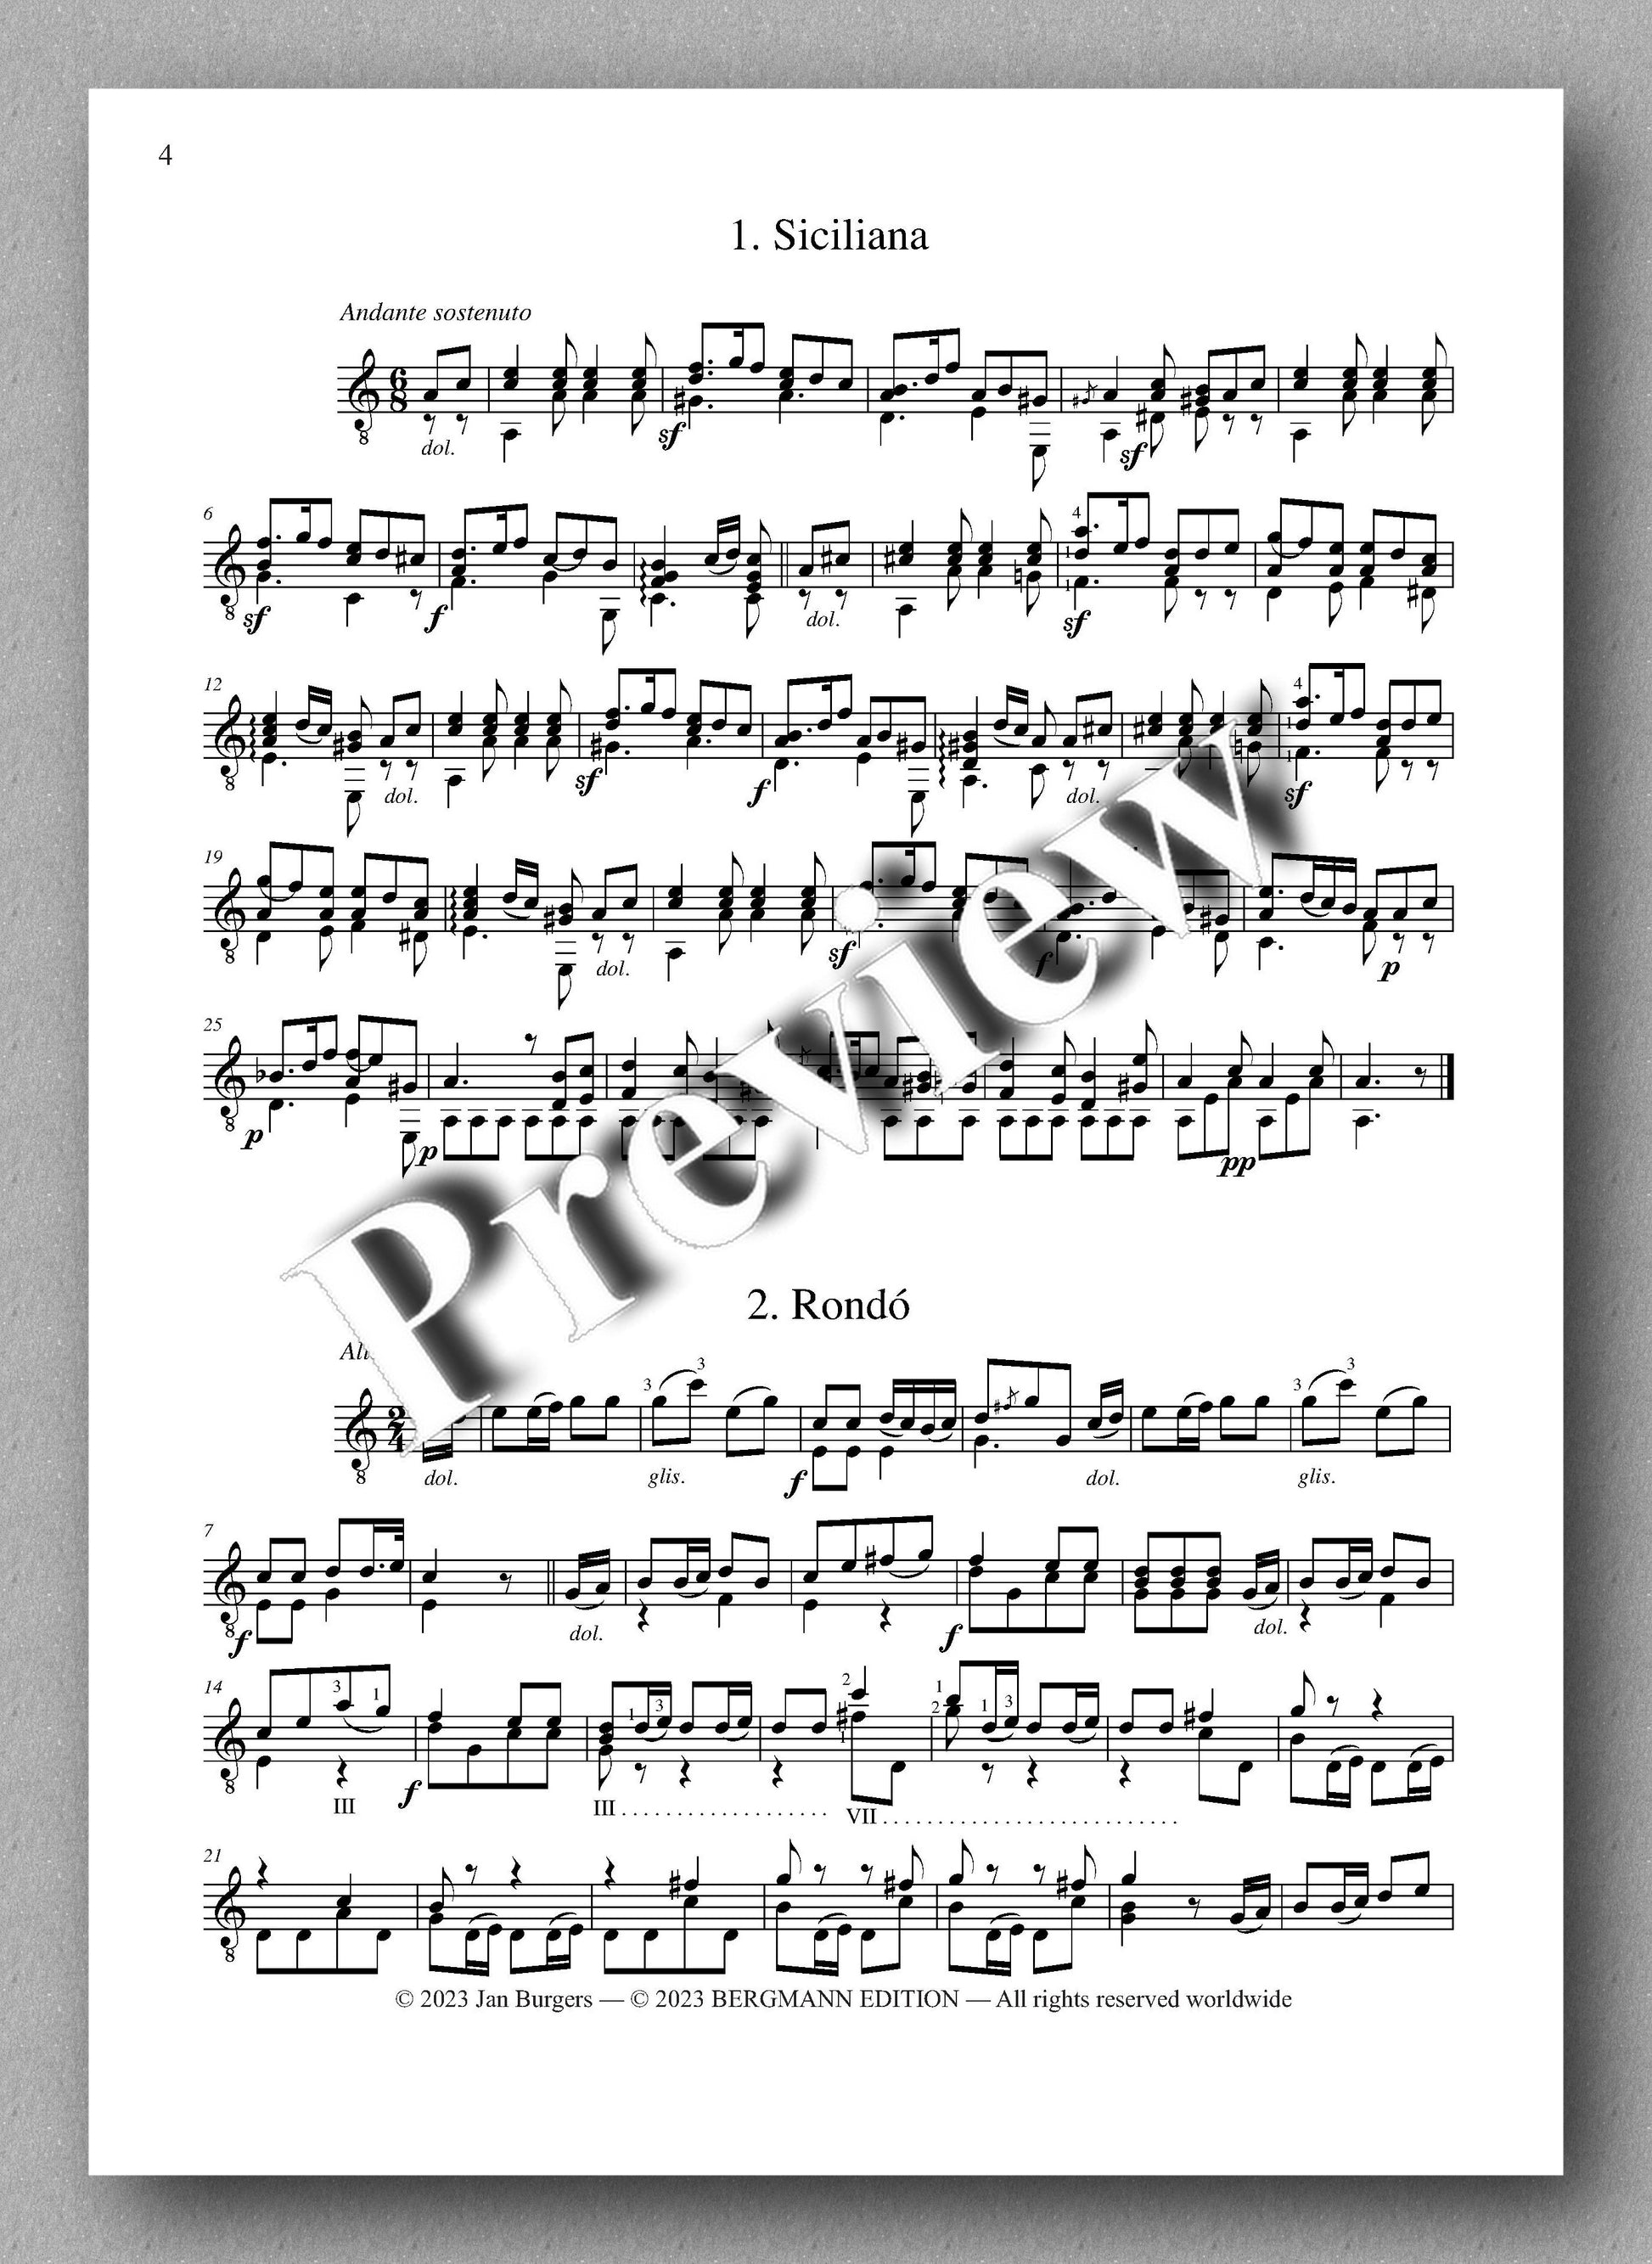 Molino, Collected Works for Guitar Solo, Vol. 17 - preview of the music score 1